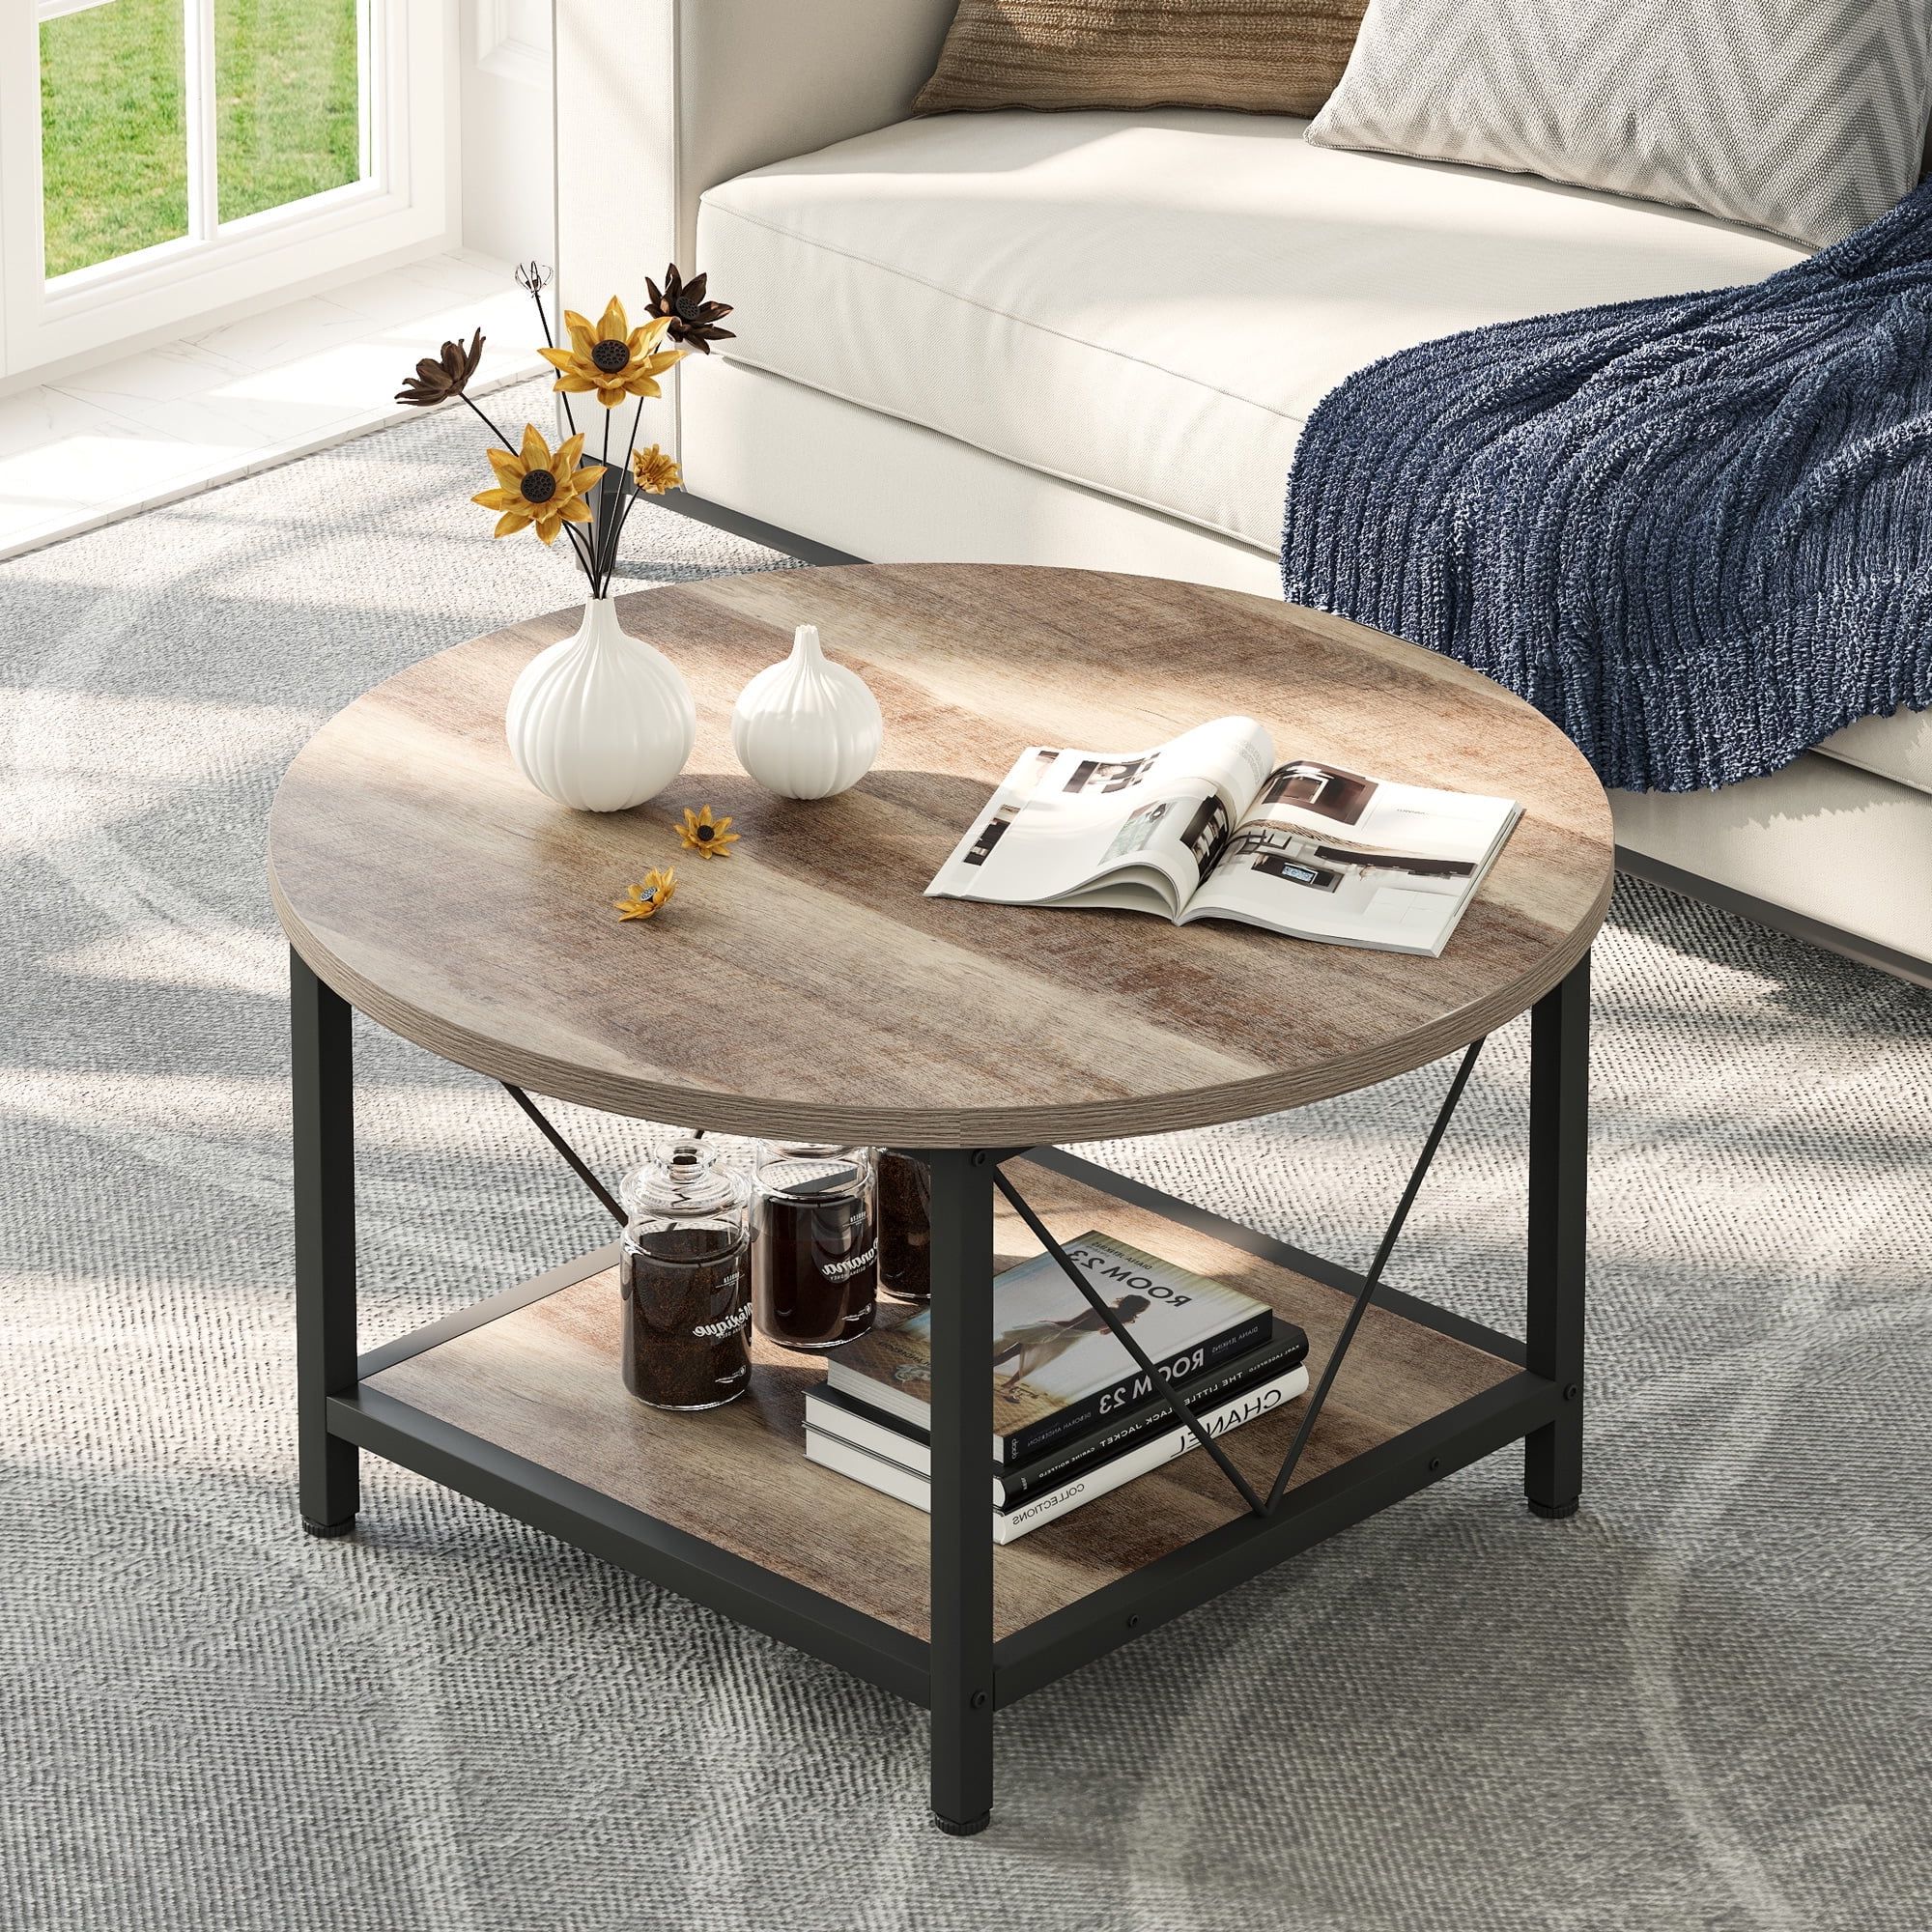 Dextrus Round Coffee Table With Storage, Rustic Living Room Tables With  Sturdy Metal Legs, Gray Wash – Walmart Throughout Most Recent Coffee Tables With Metal Legs (View 7 of 10)